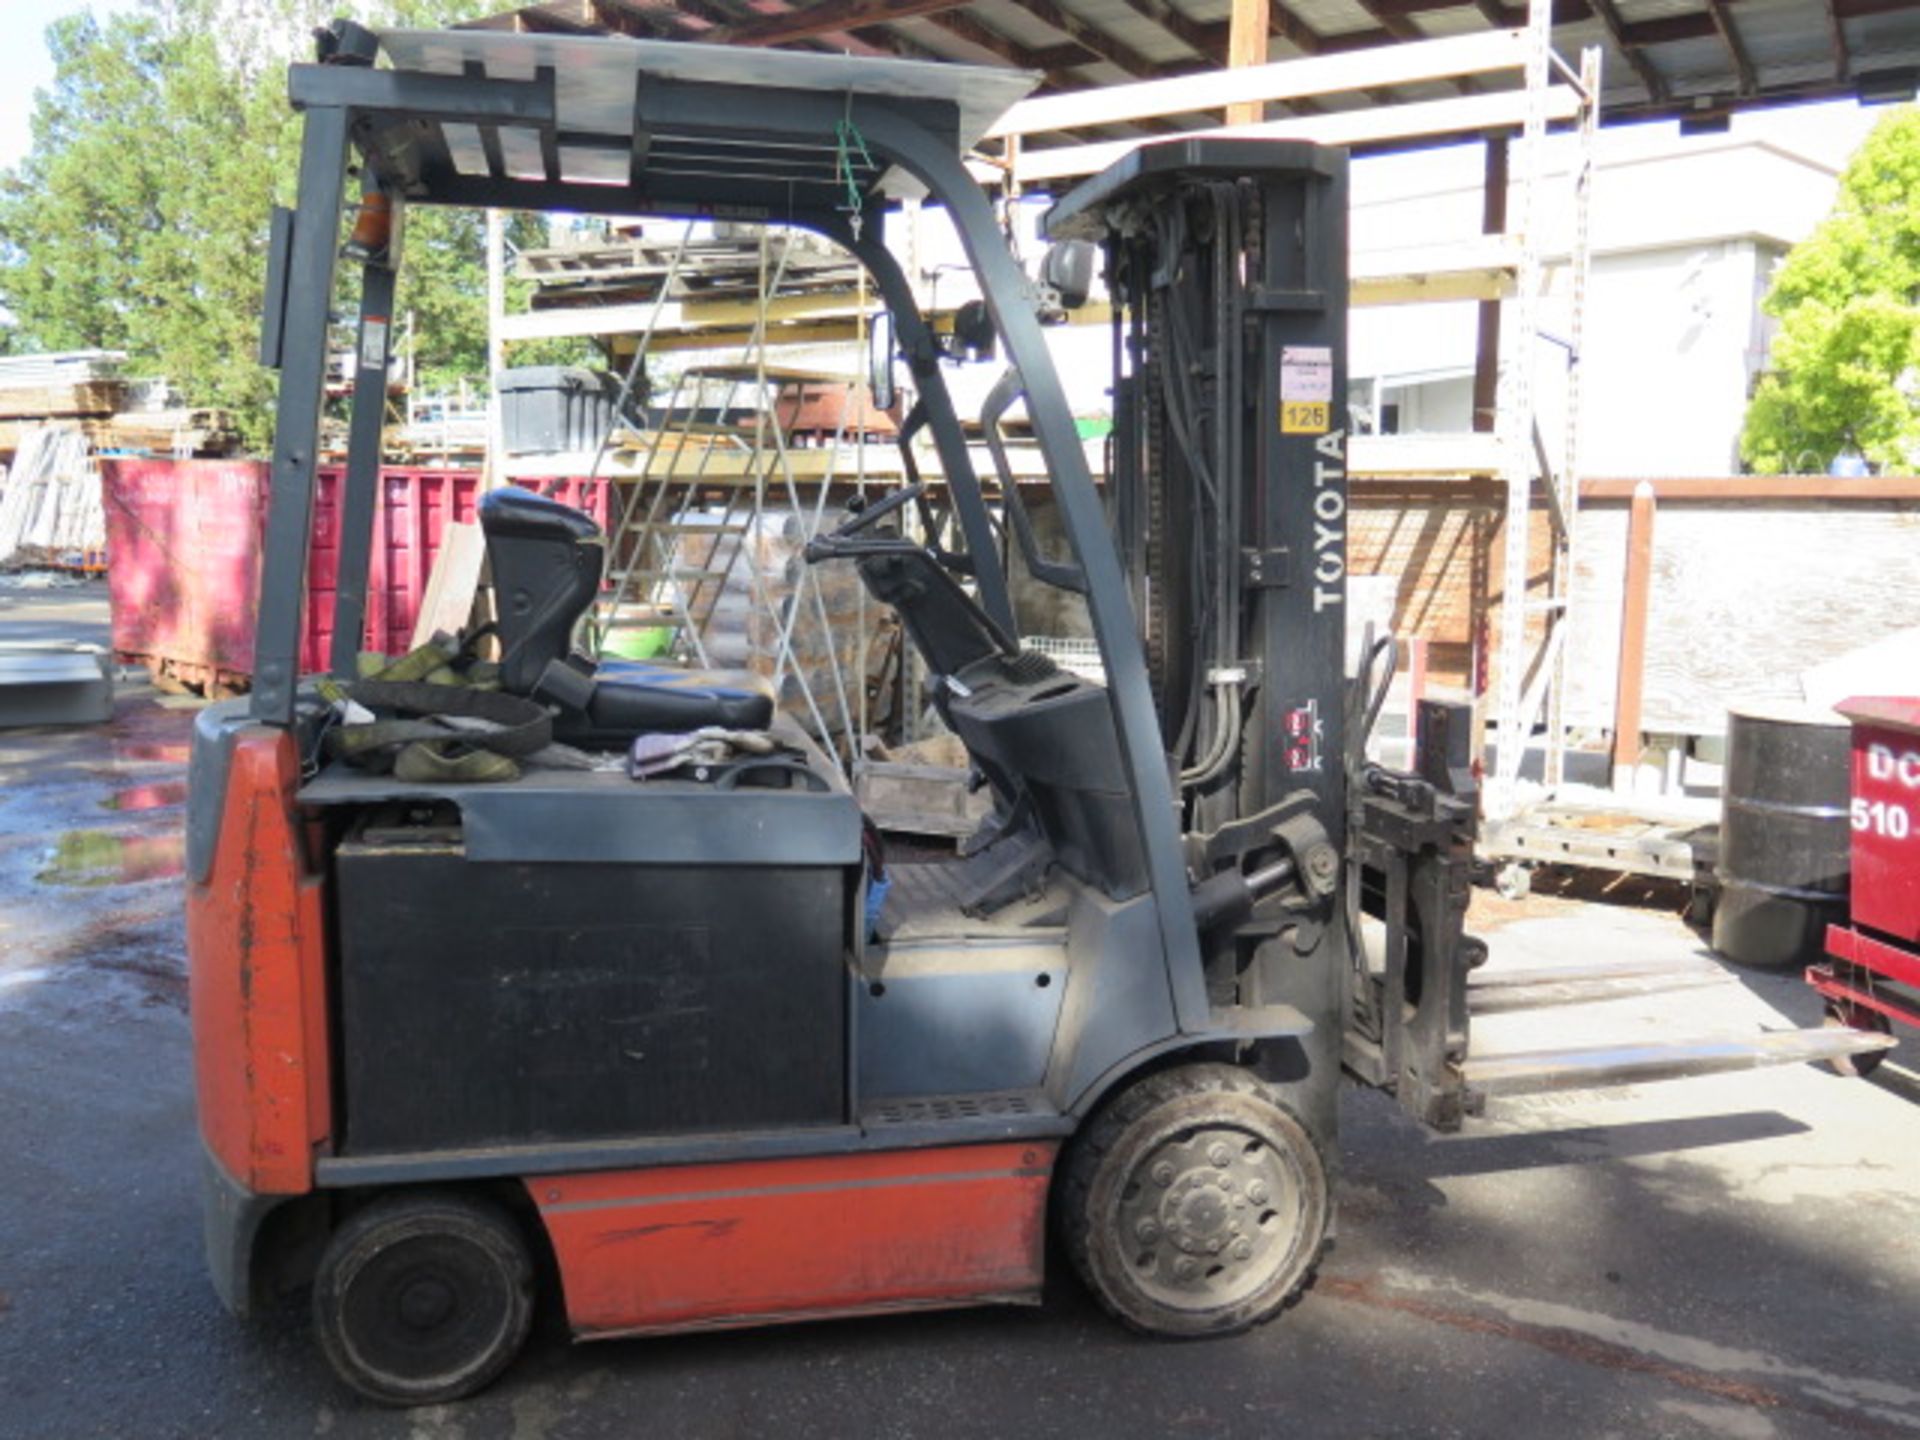 Toyota 8FBCU20 Single-Double Electric Forklift s/n 62017 w/3-Stage Mast, 187” Lift Height,SOLD AS IS - Image 2 of 18